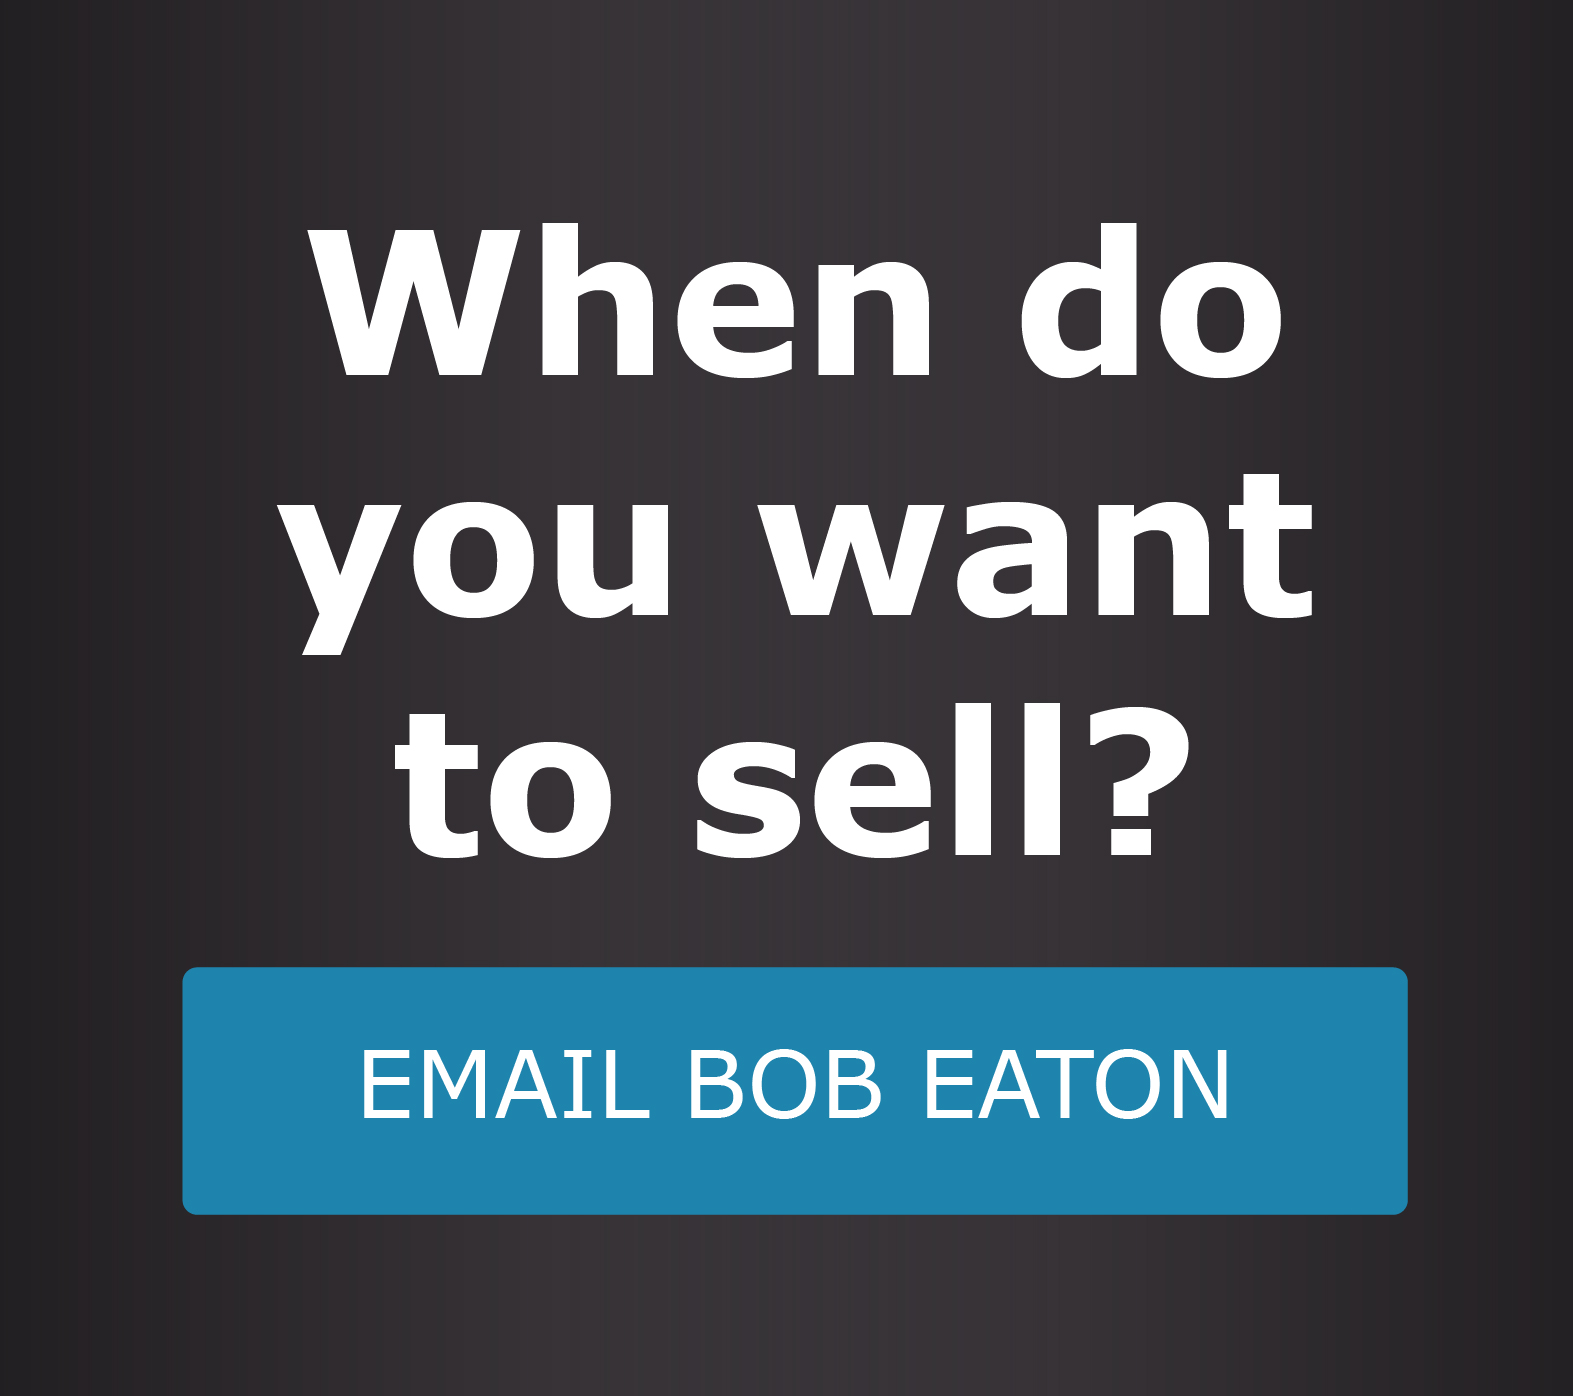 When do you want to sell? Email Bob Eaton